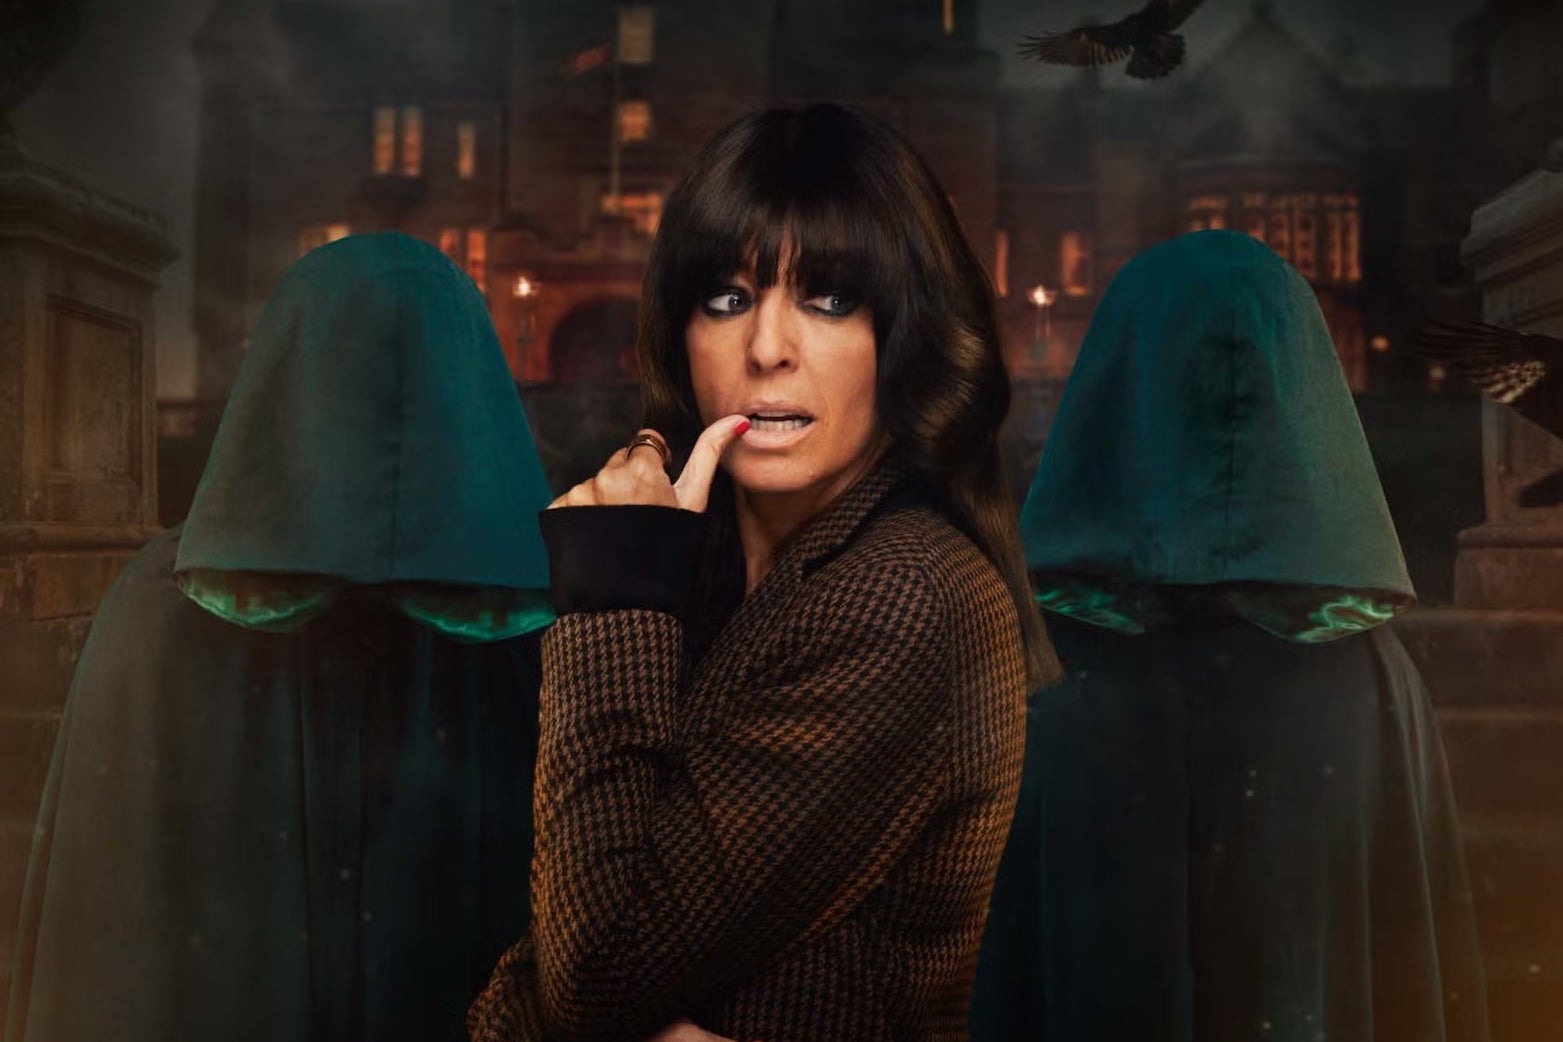 Claudia Winkleman on the set of The Traitors